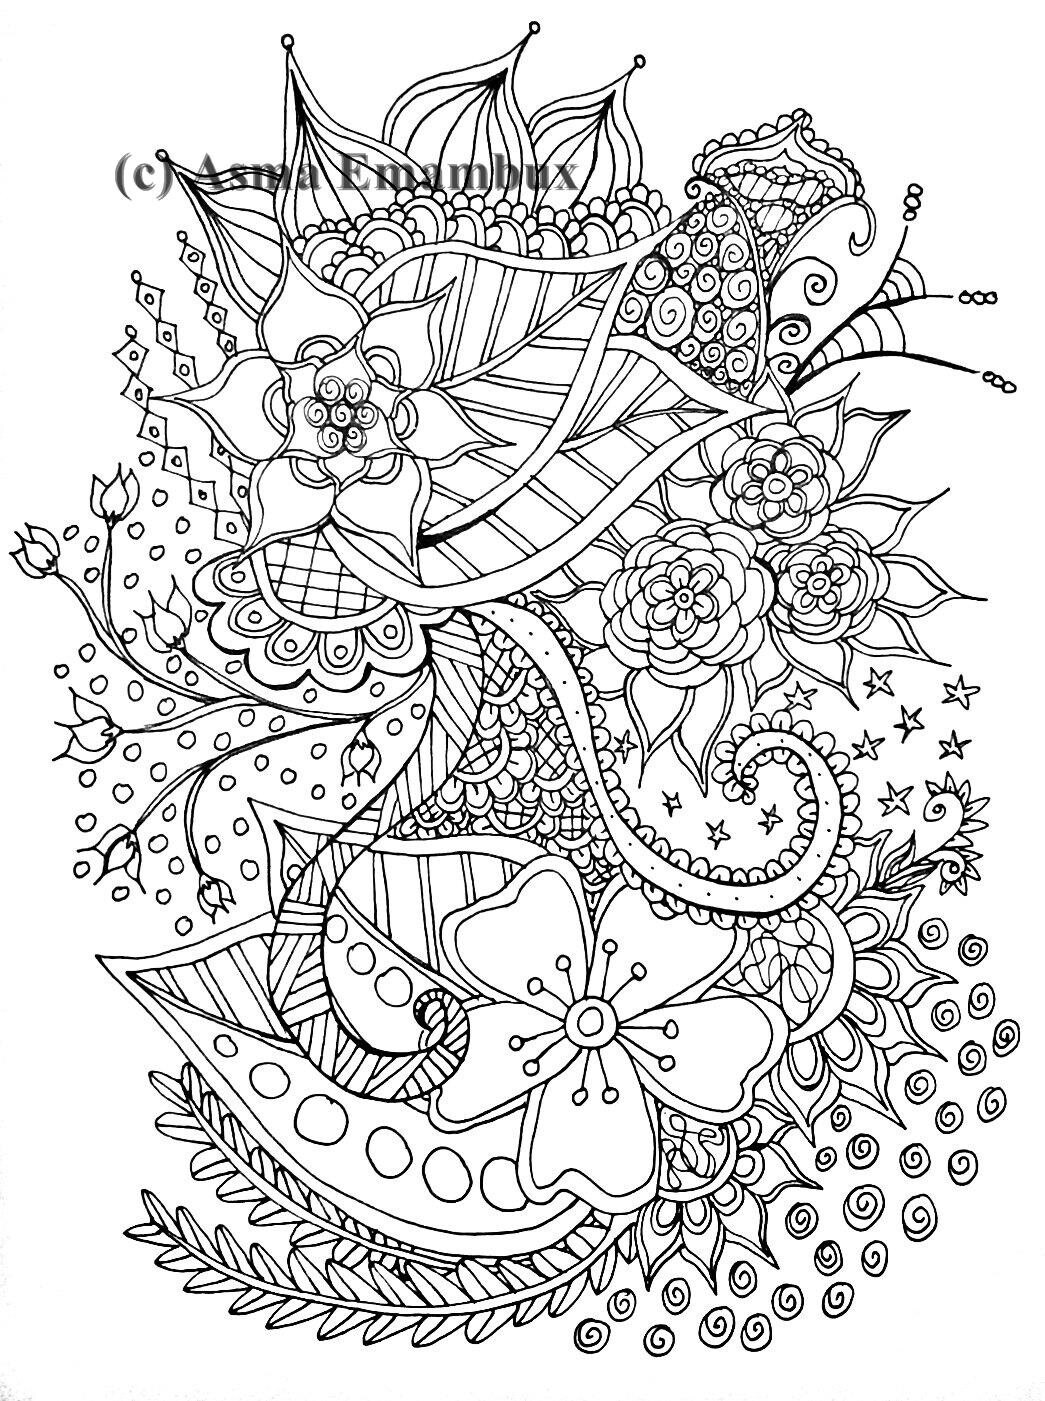 Flower zendoodle coloring page Etsy